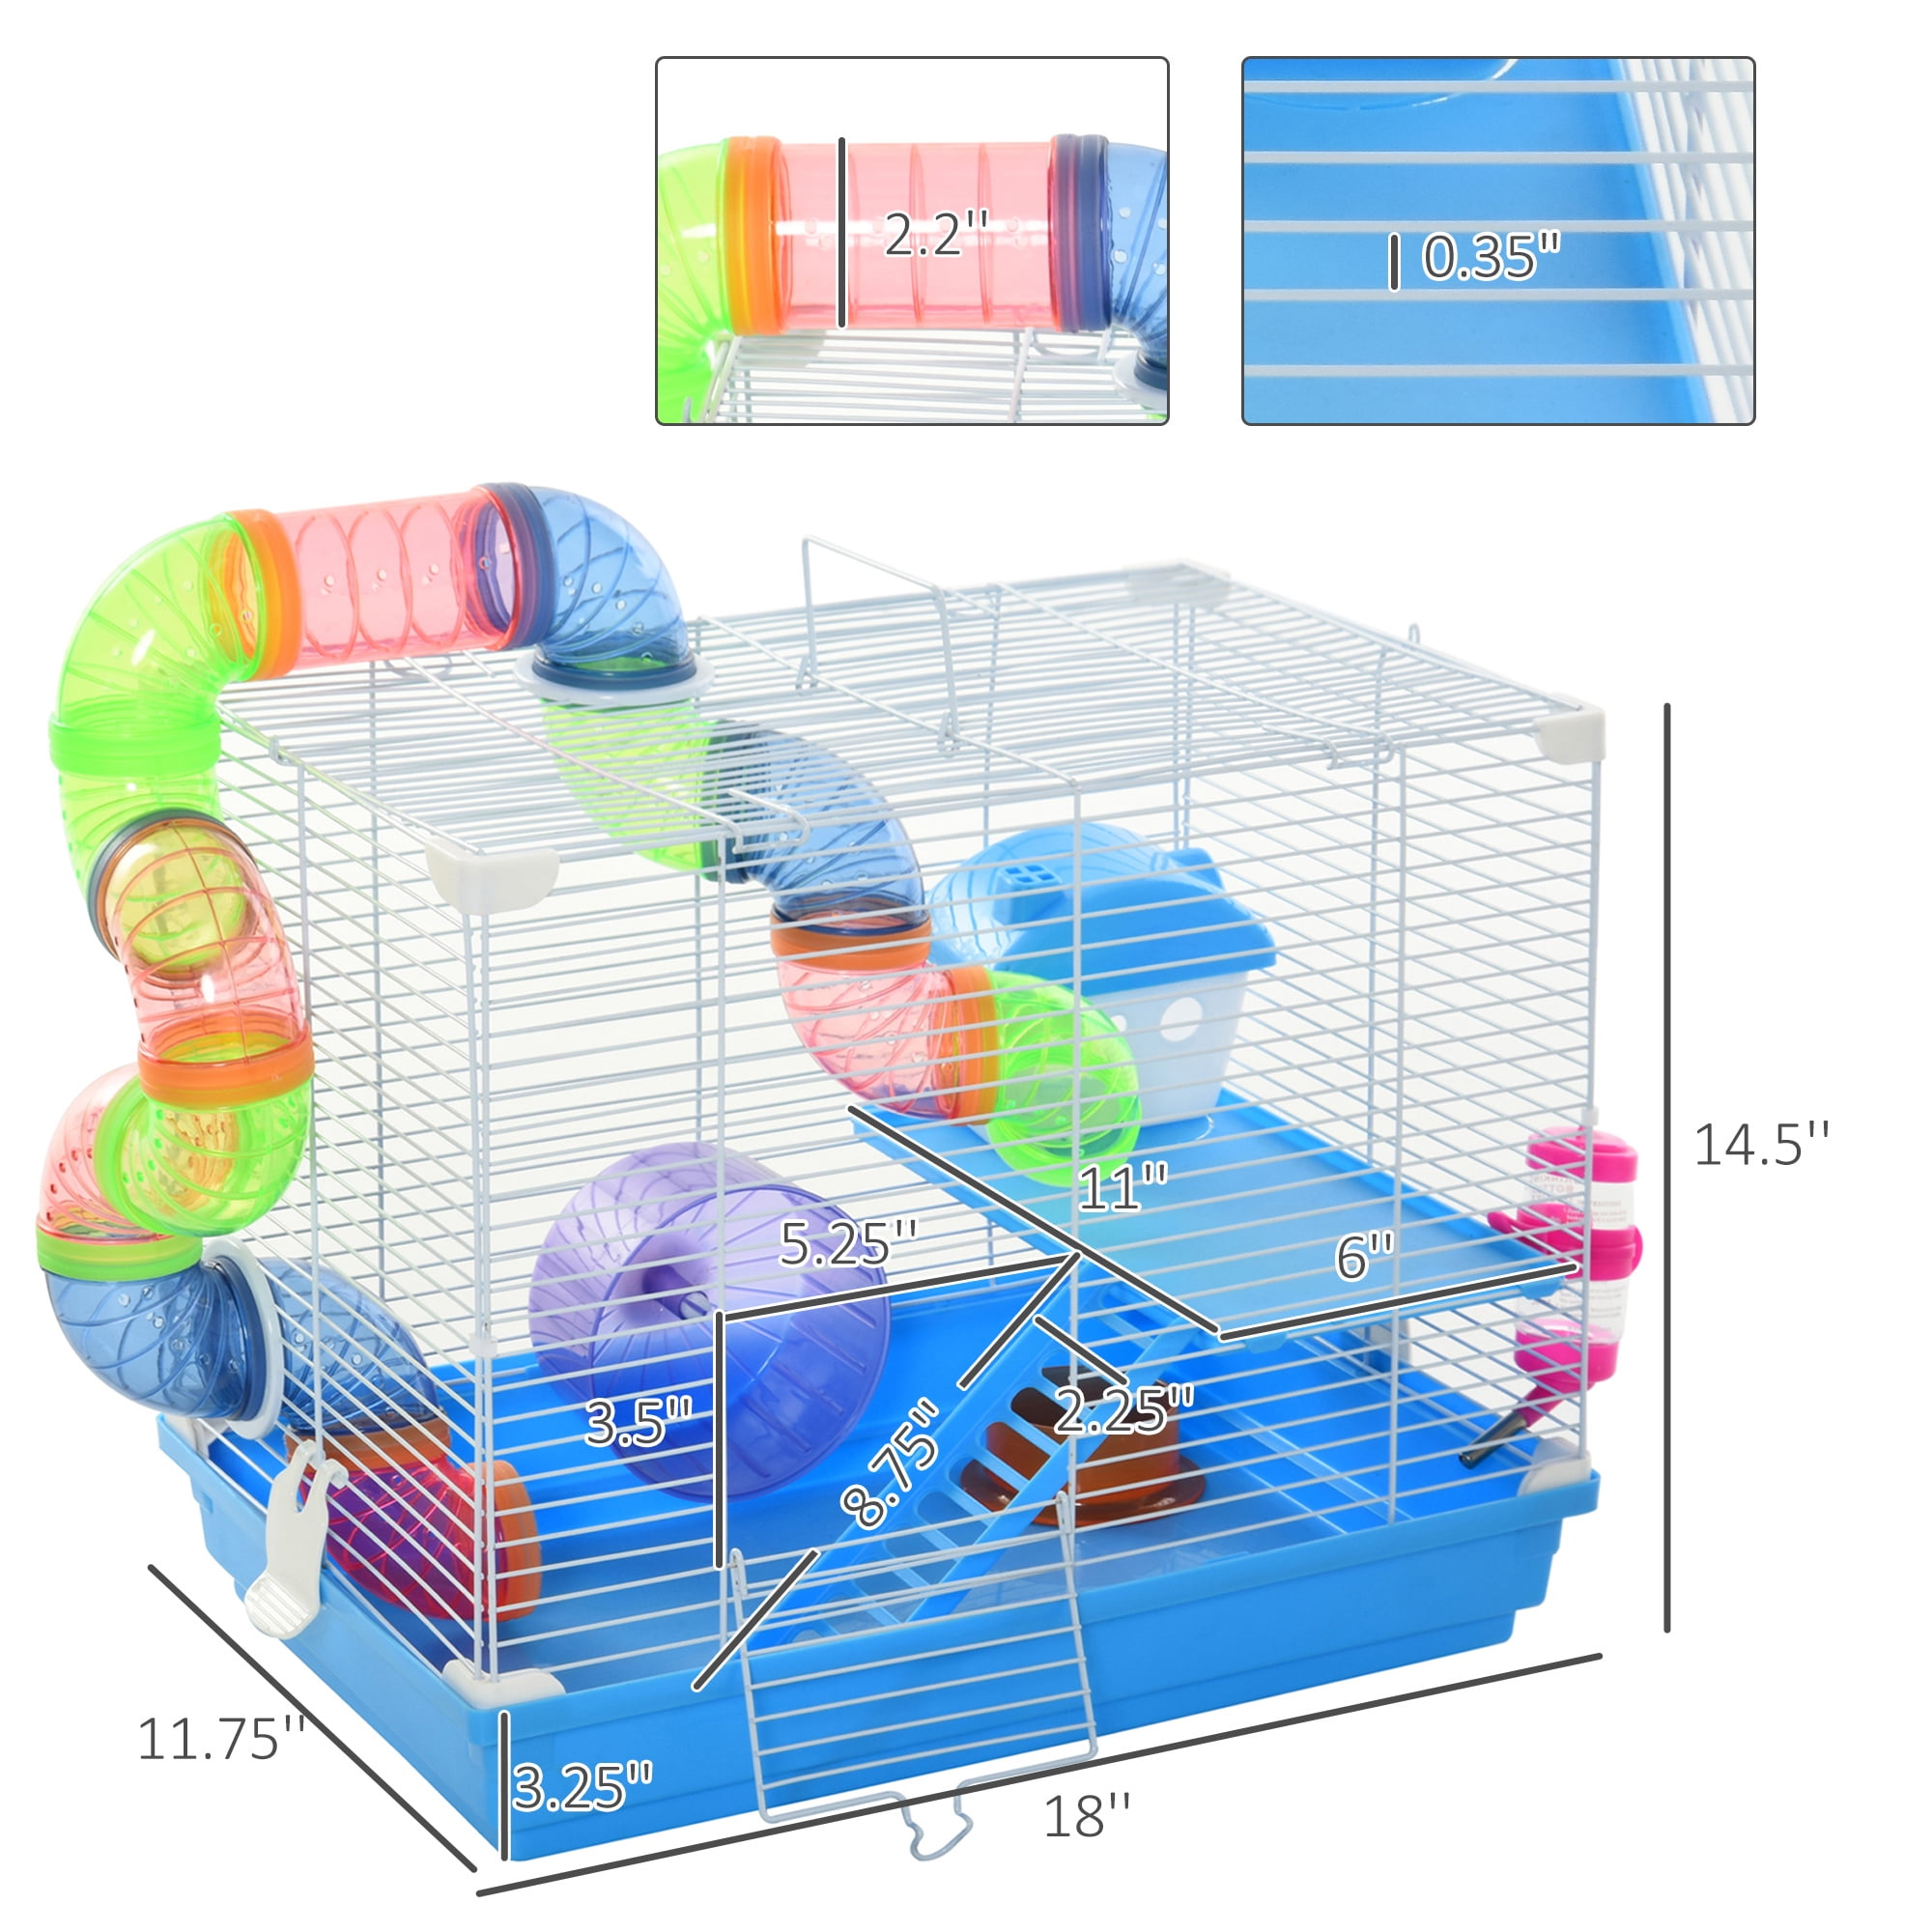 6. Teach your Kids the Importance of Pet Care with these Cool Hamster Furnishings and Toys.